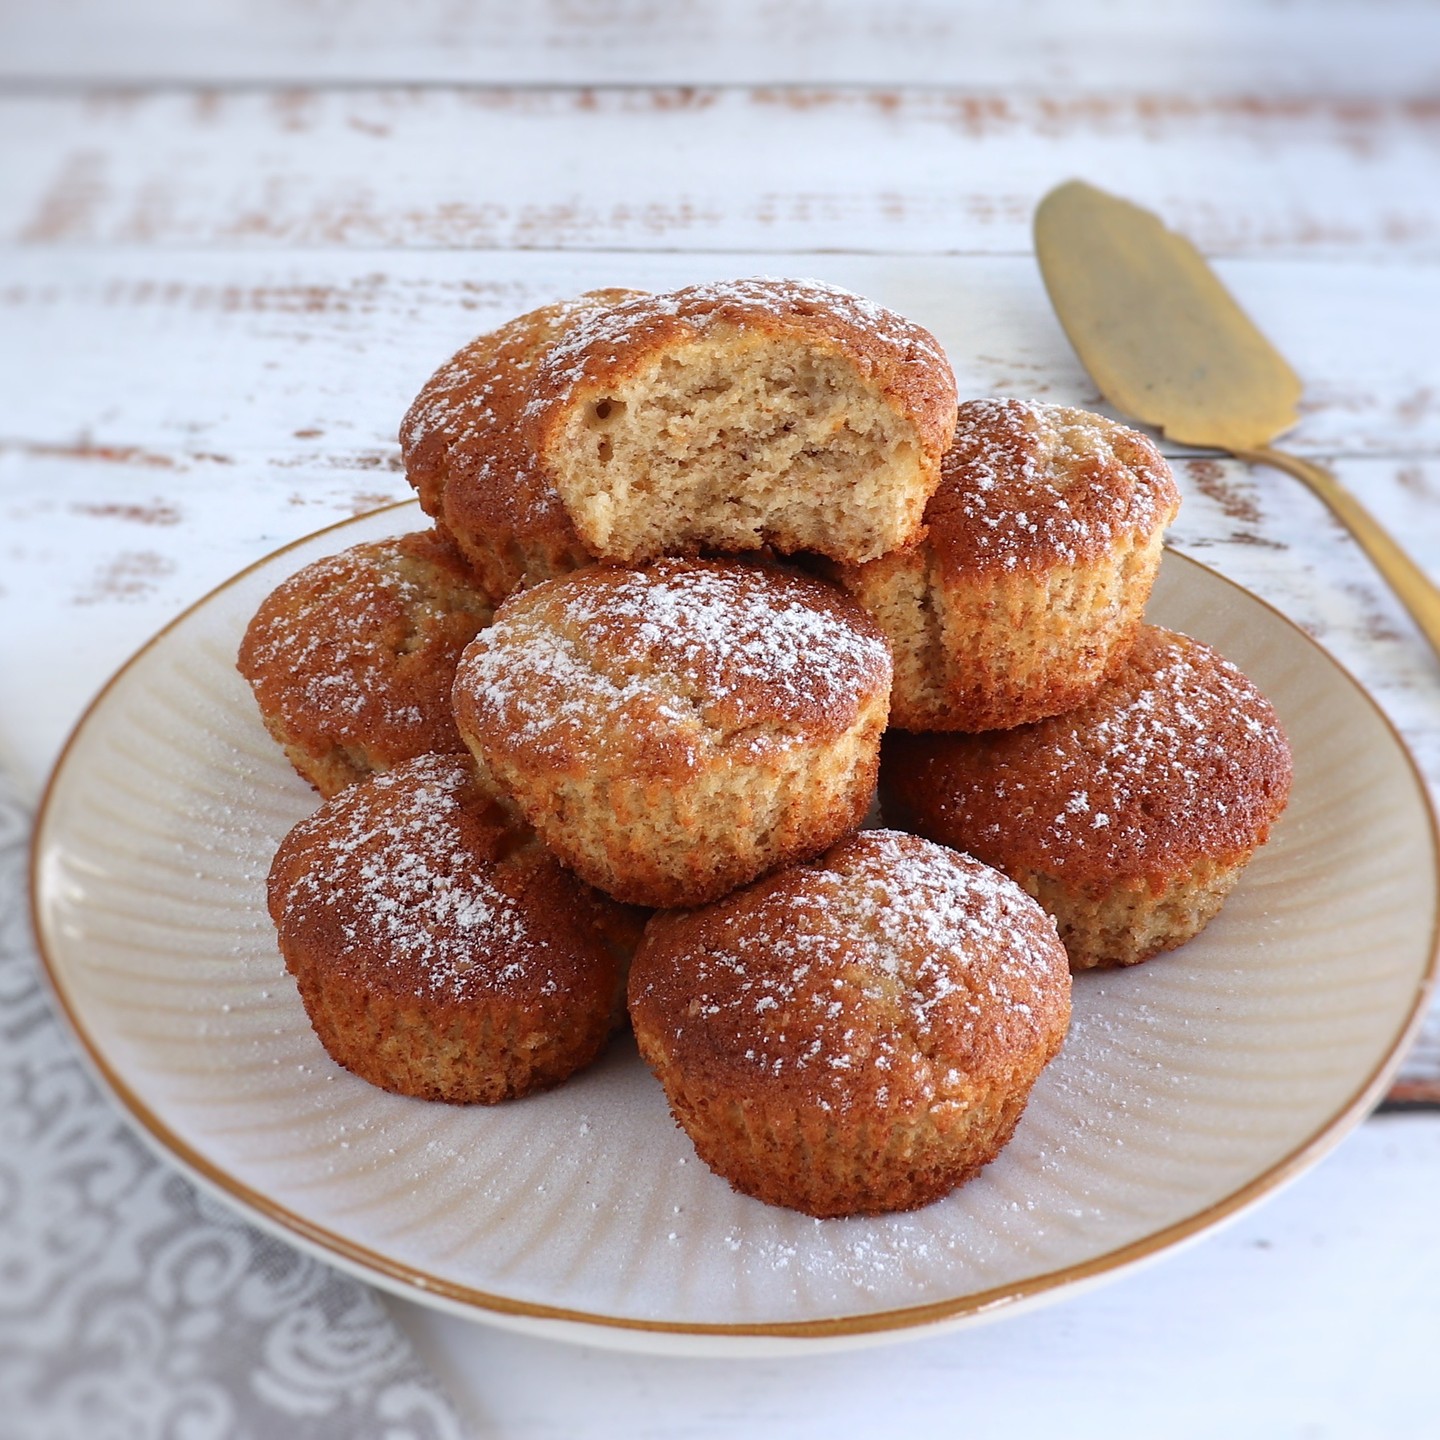 Easy banana muffins | Food From Portugal

Do you like muffins? Do you like the banana aroma? Make these delicious and easy banana muffins! They are perfect to serve on any occasion!

Recipe: https://www.foodfromportugal.com/recipes/easy-banana-muffins/

#food #easy #easyrecipes #instafood #recipe #recipes #homemade #muffin #muffins #banana #bananamuffins